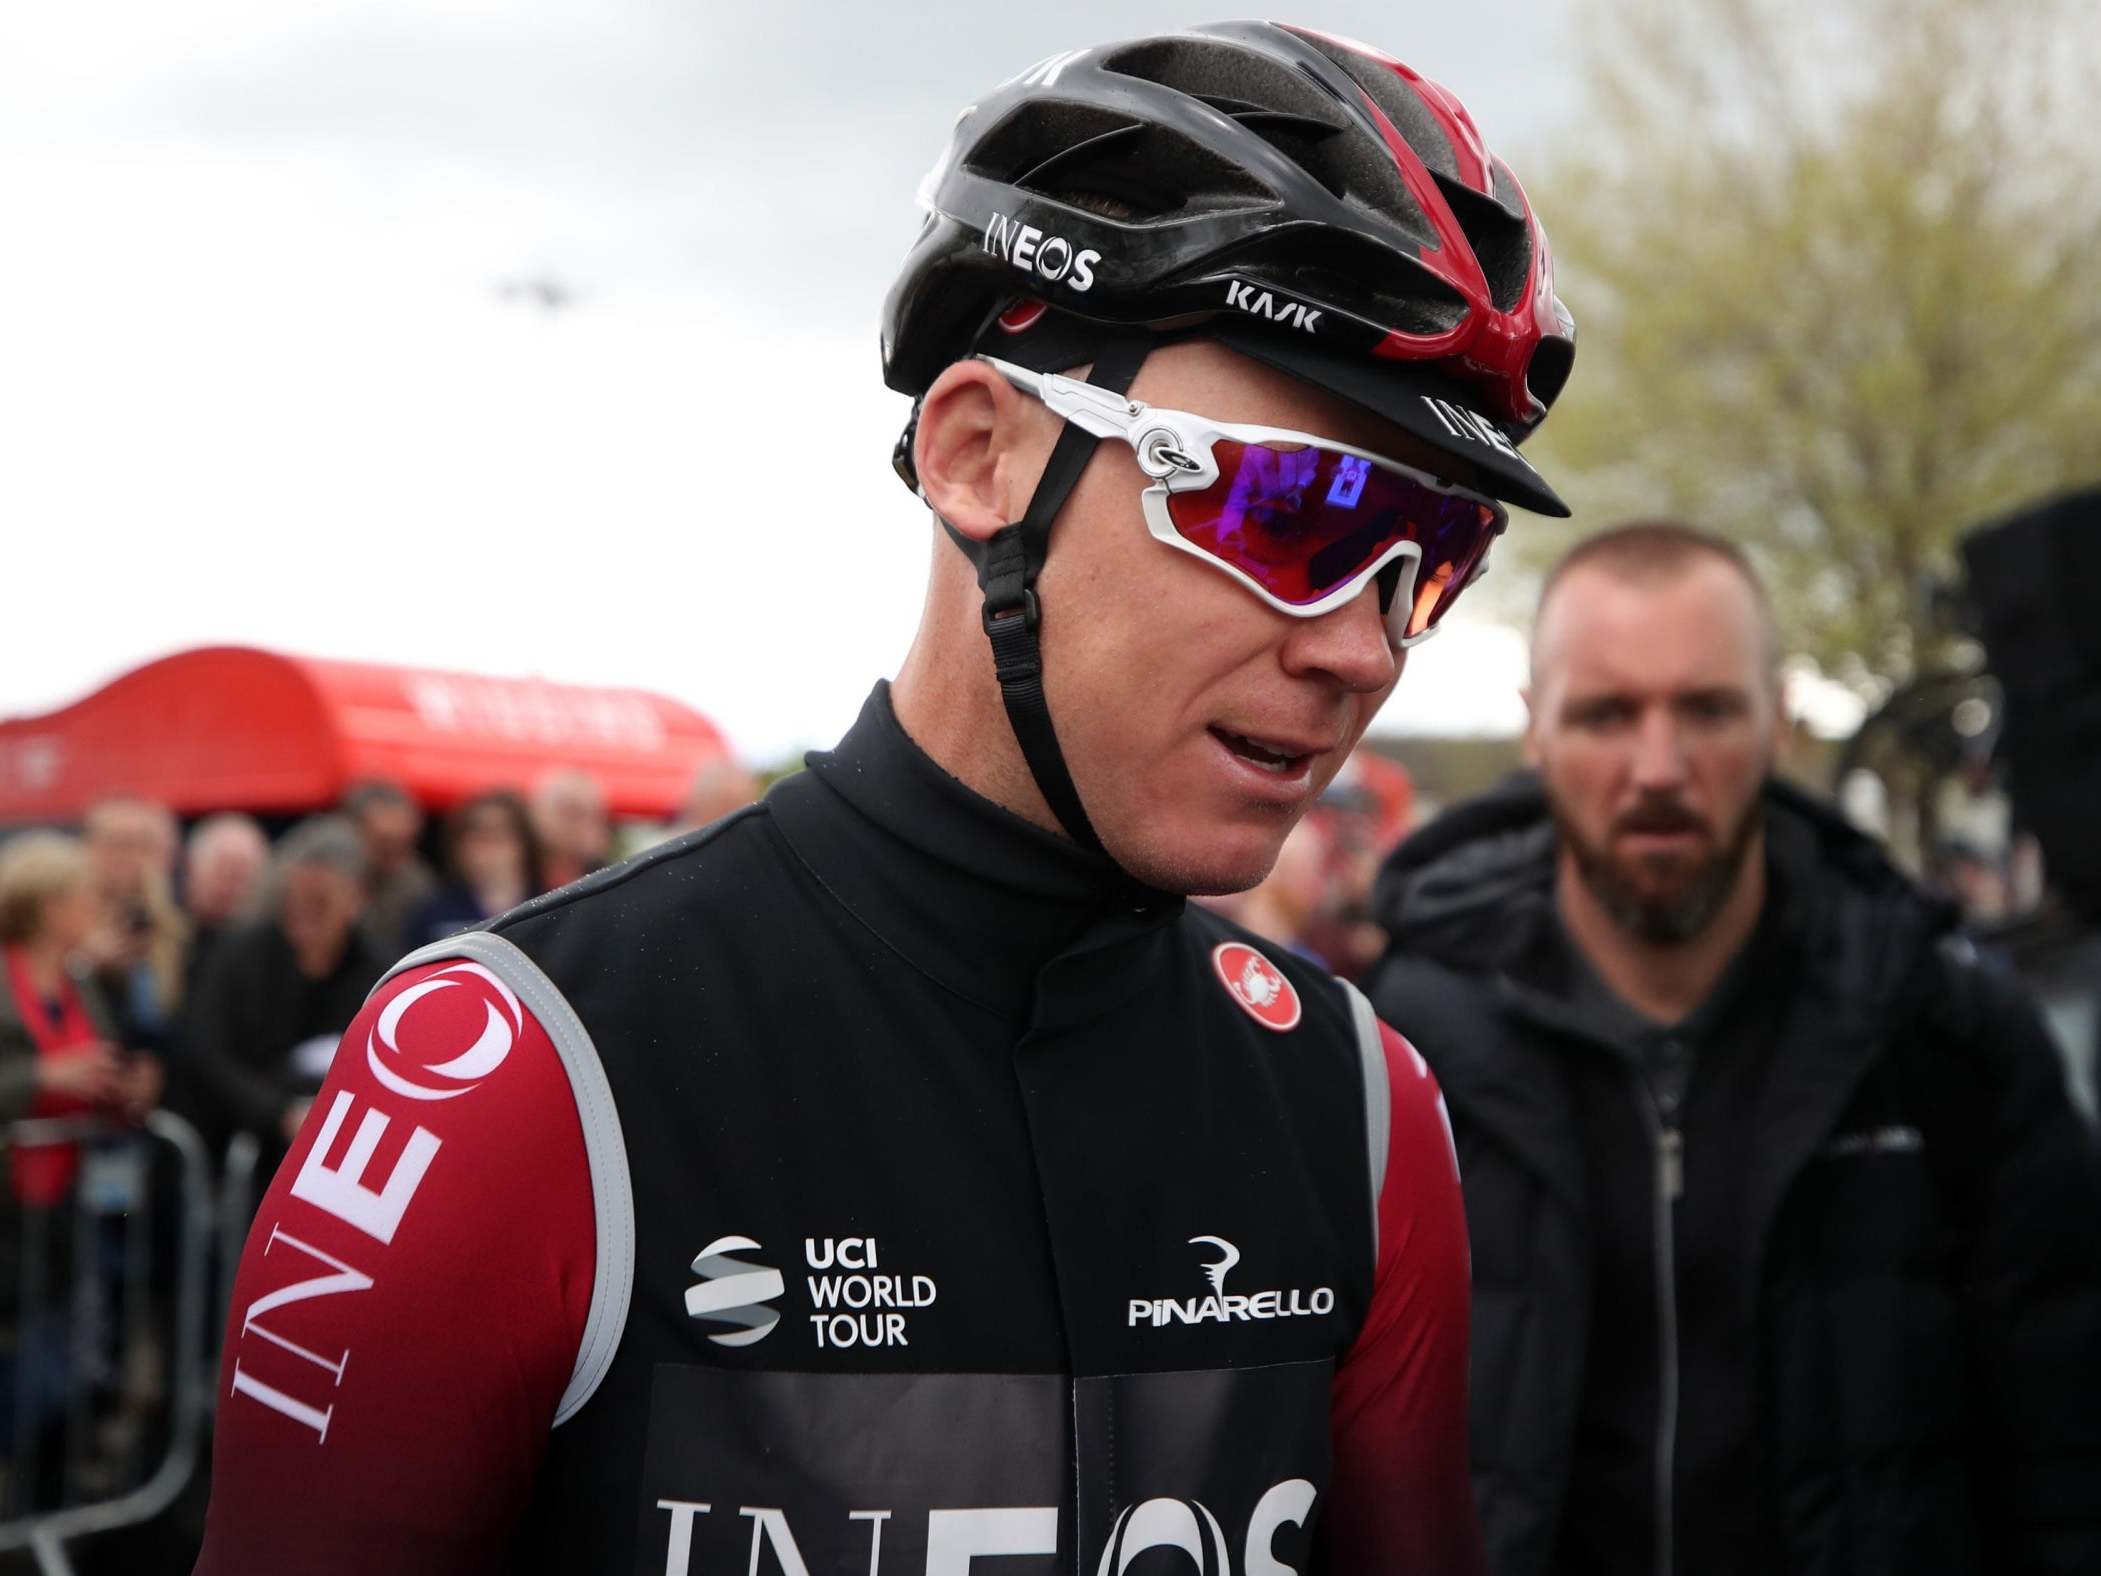 Chris Froome suffered multiple injuries in the incident